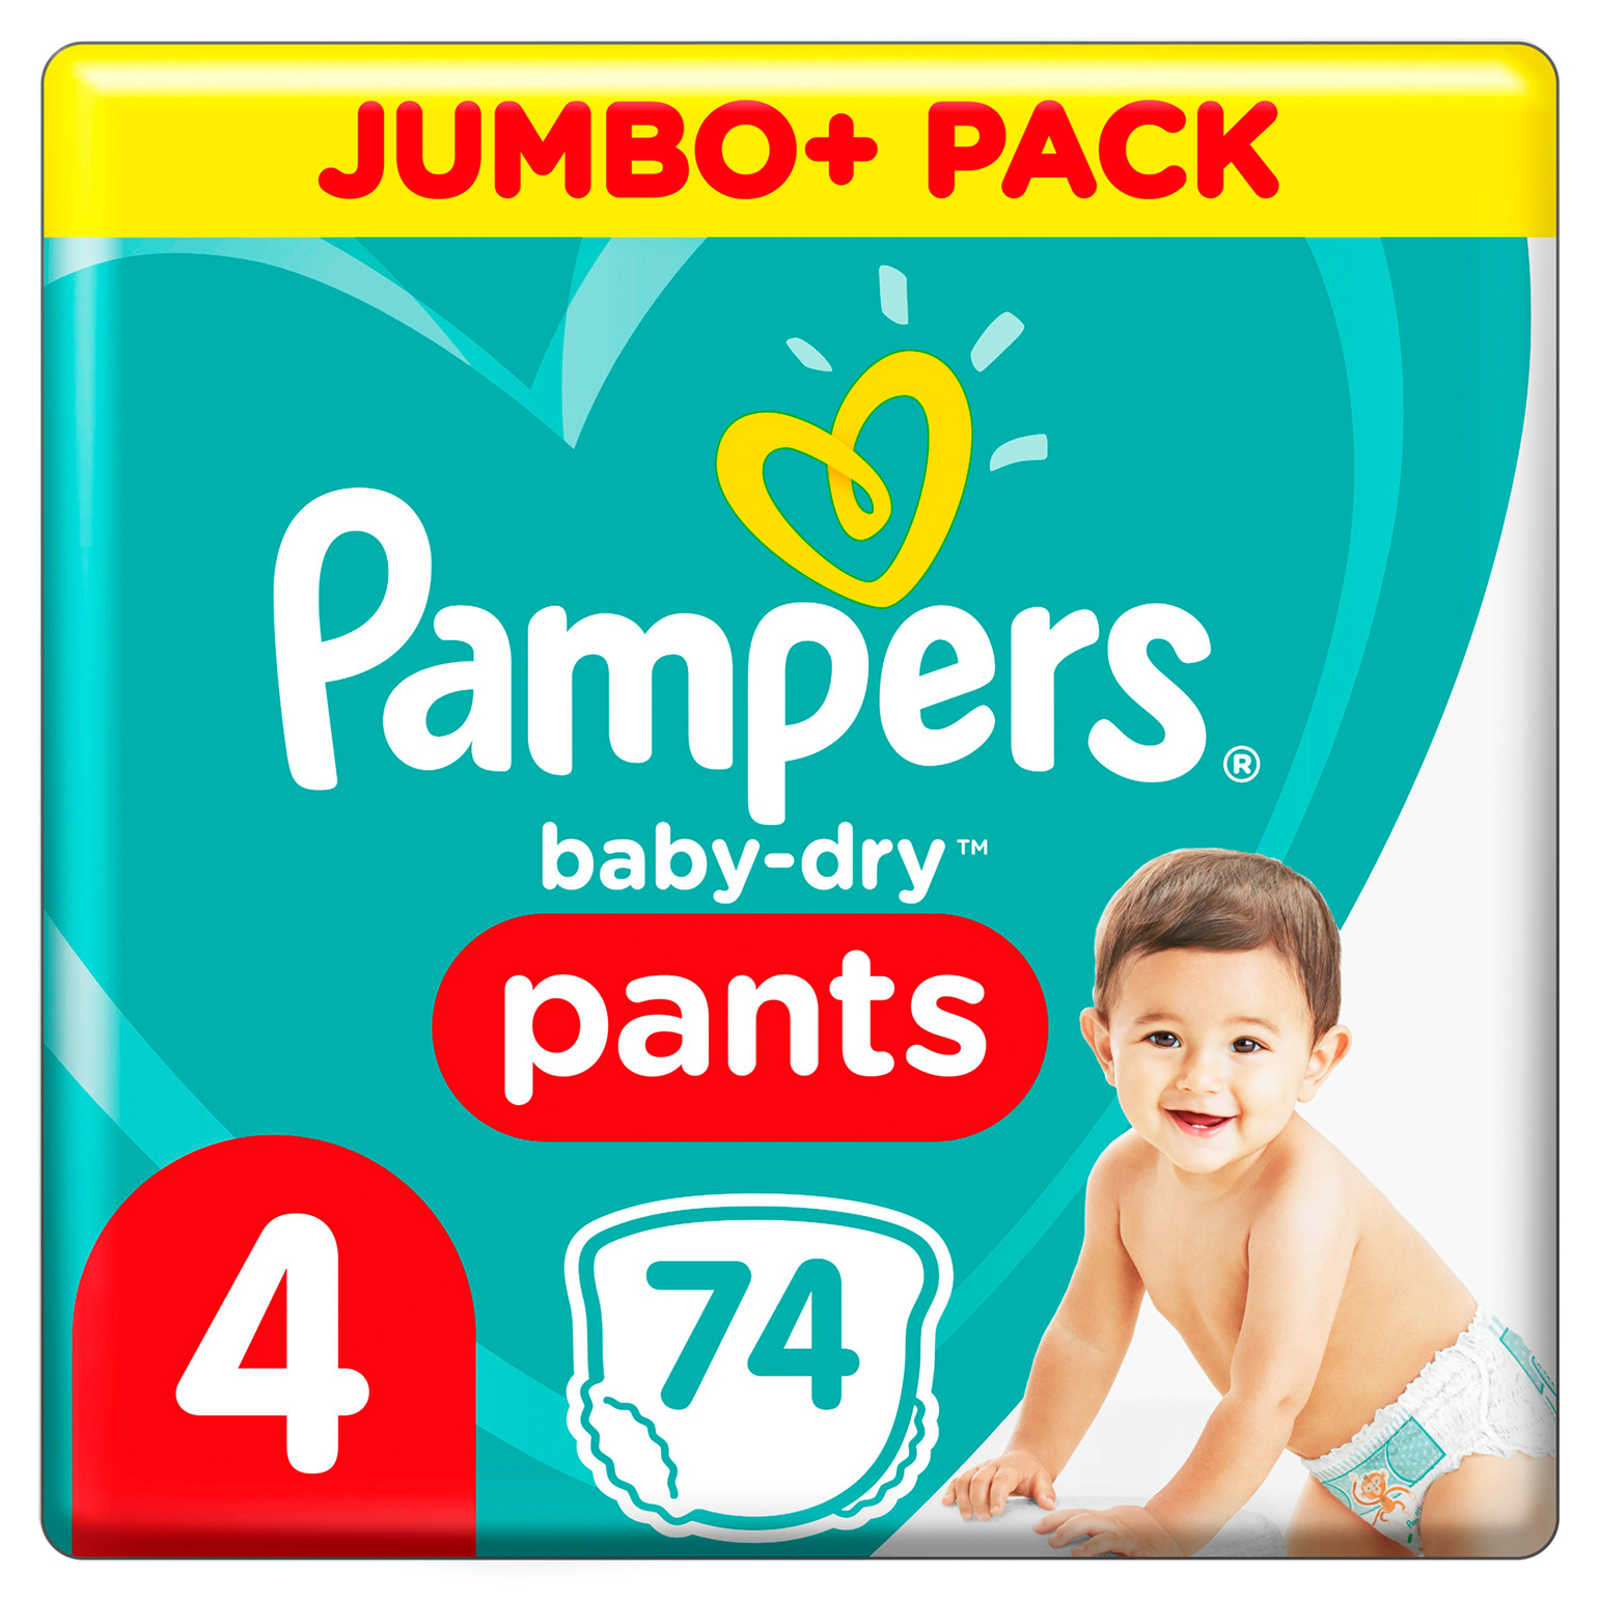 Pampers-Baby-Dry Pants